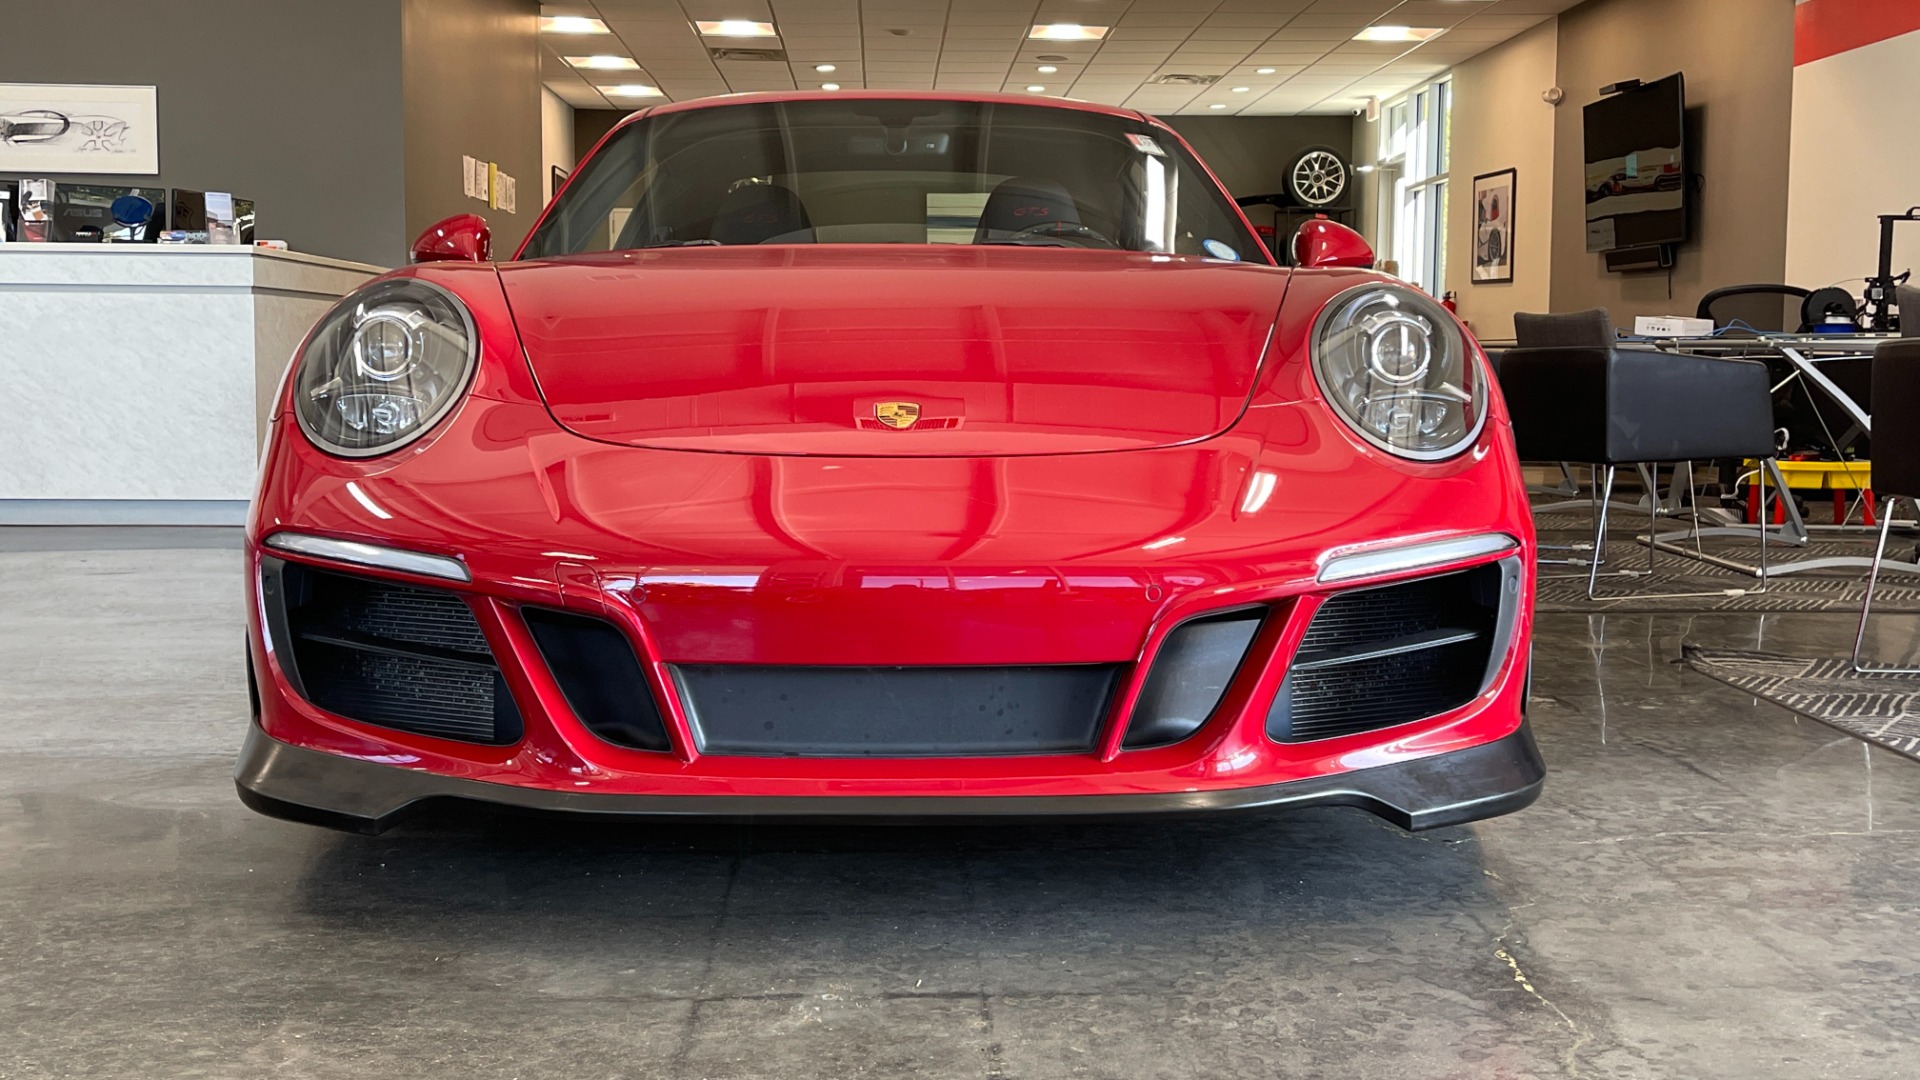 Used 2019 Porsche 911 Carrera GTS / TITANIUM EXHAUST / CARBON FIBER / TECHART SPRINGS / BBS WHEEL for sale $123,995 at Formula Imports in Charlotte NC 28227 7